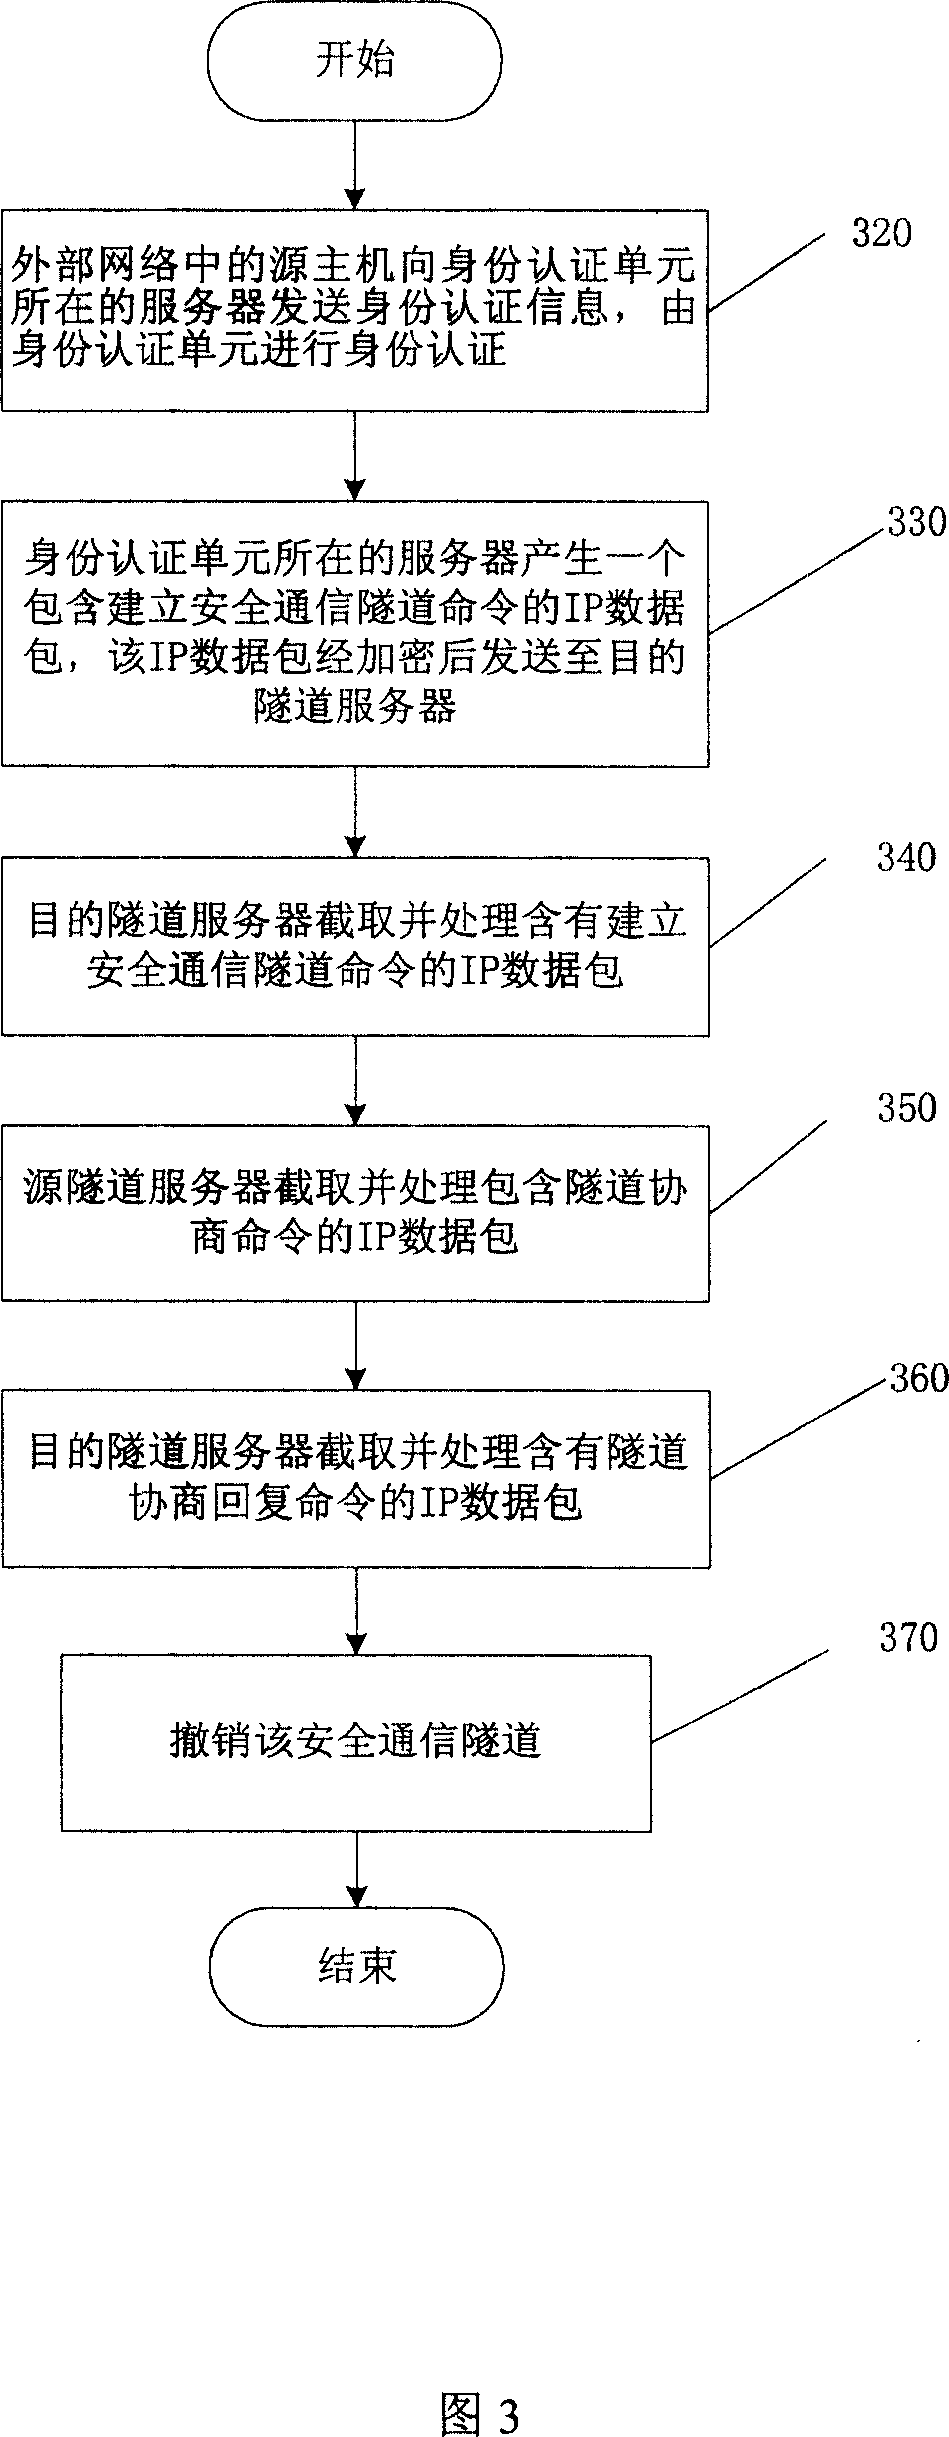 Dynamic tunnel construction method for safety access special LAN and apparatus therefor